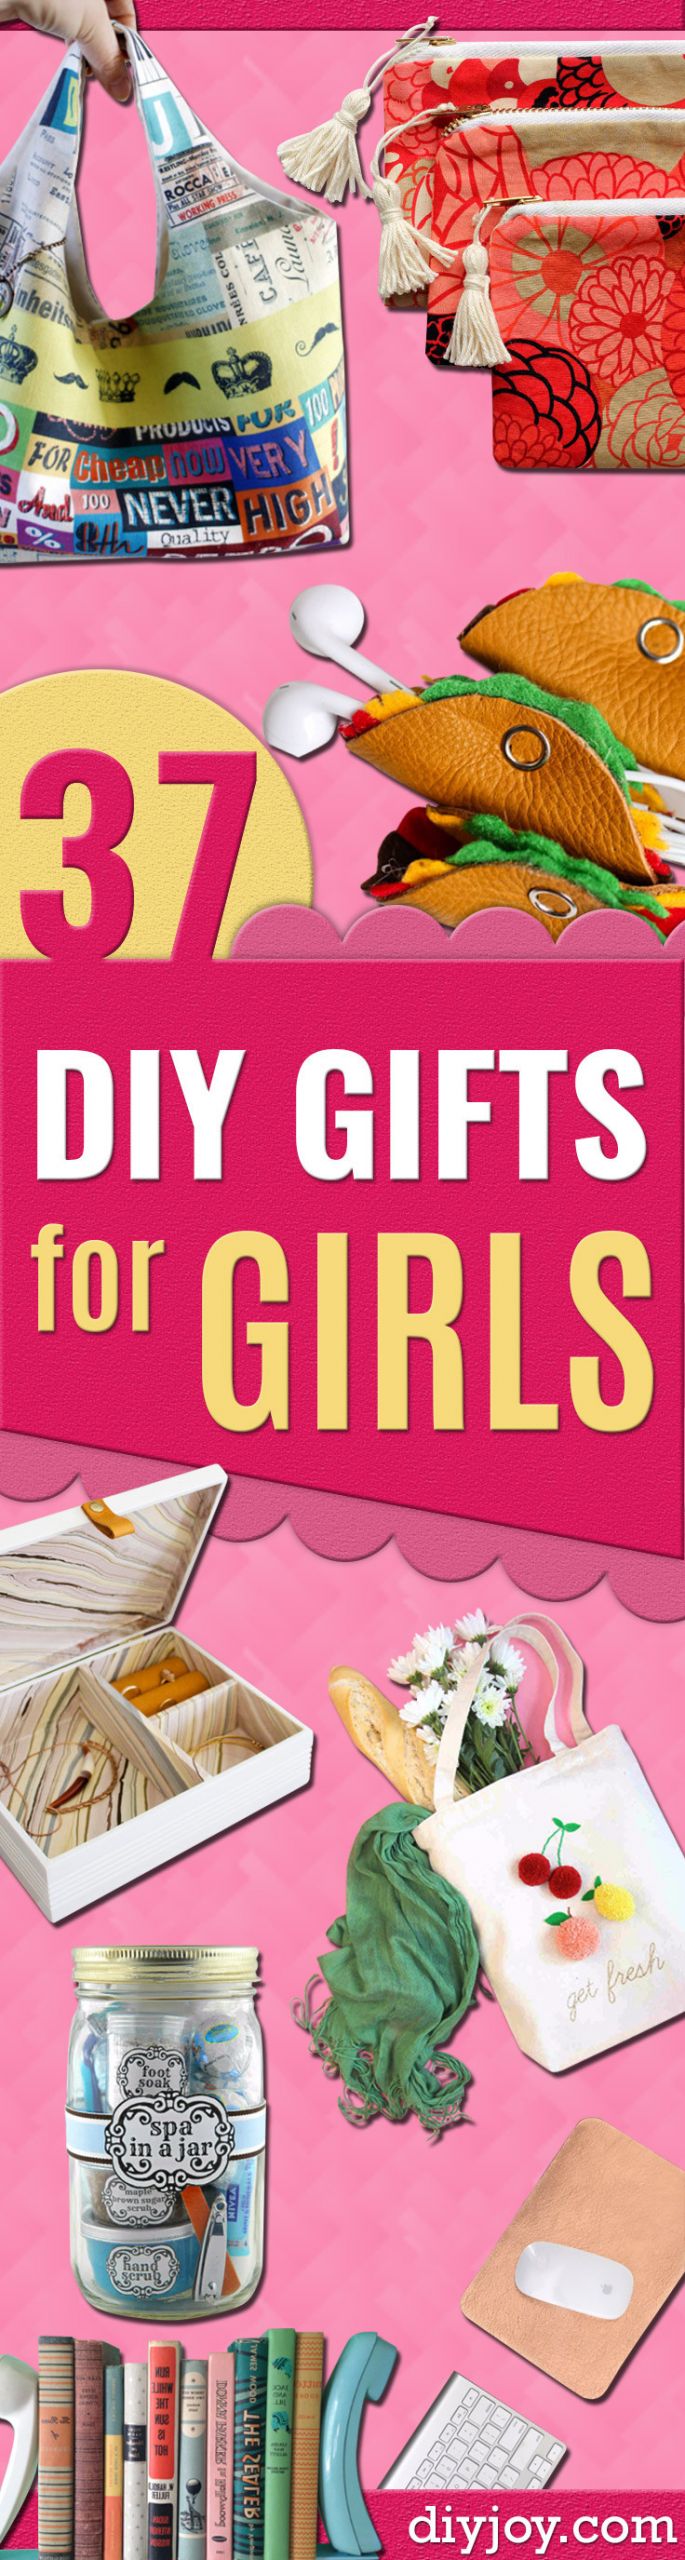 Craft Gift Ideas For Girls
 37 Best DIY Gifts for Girls